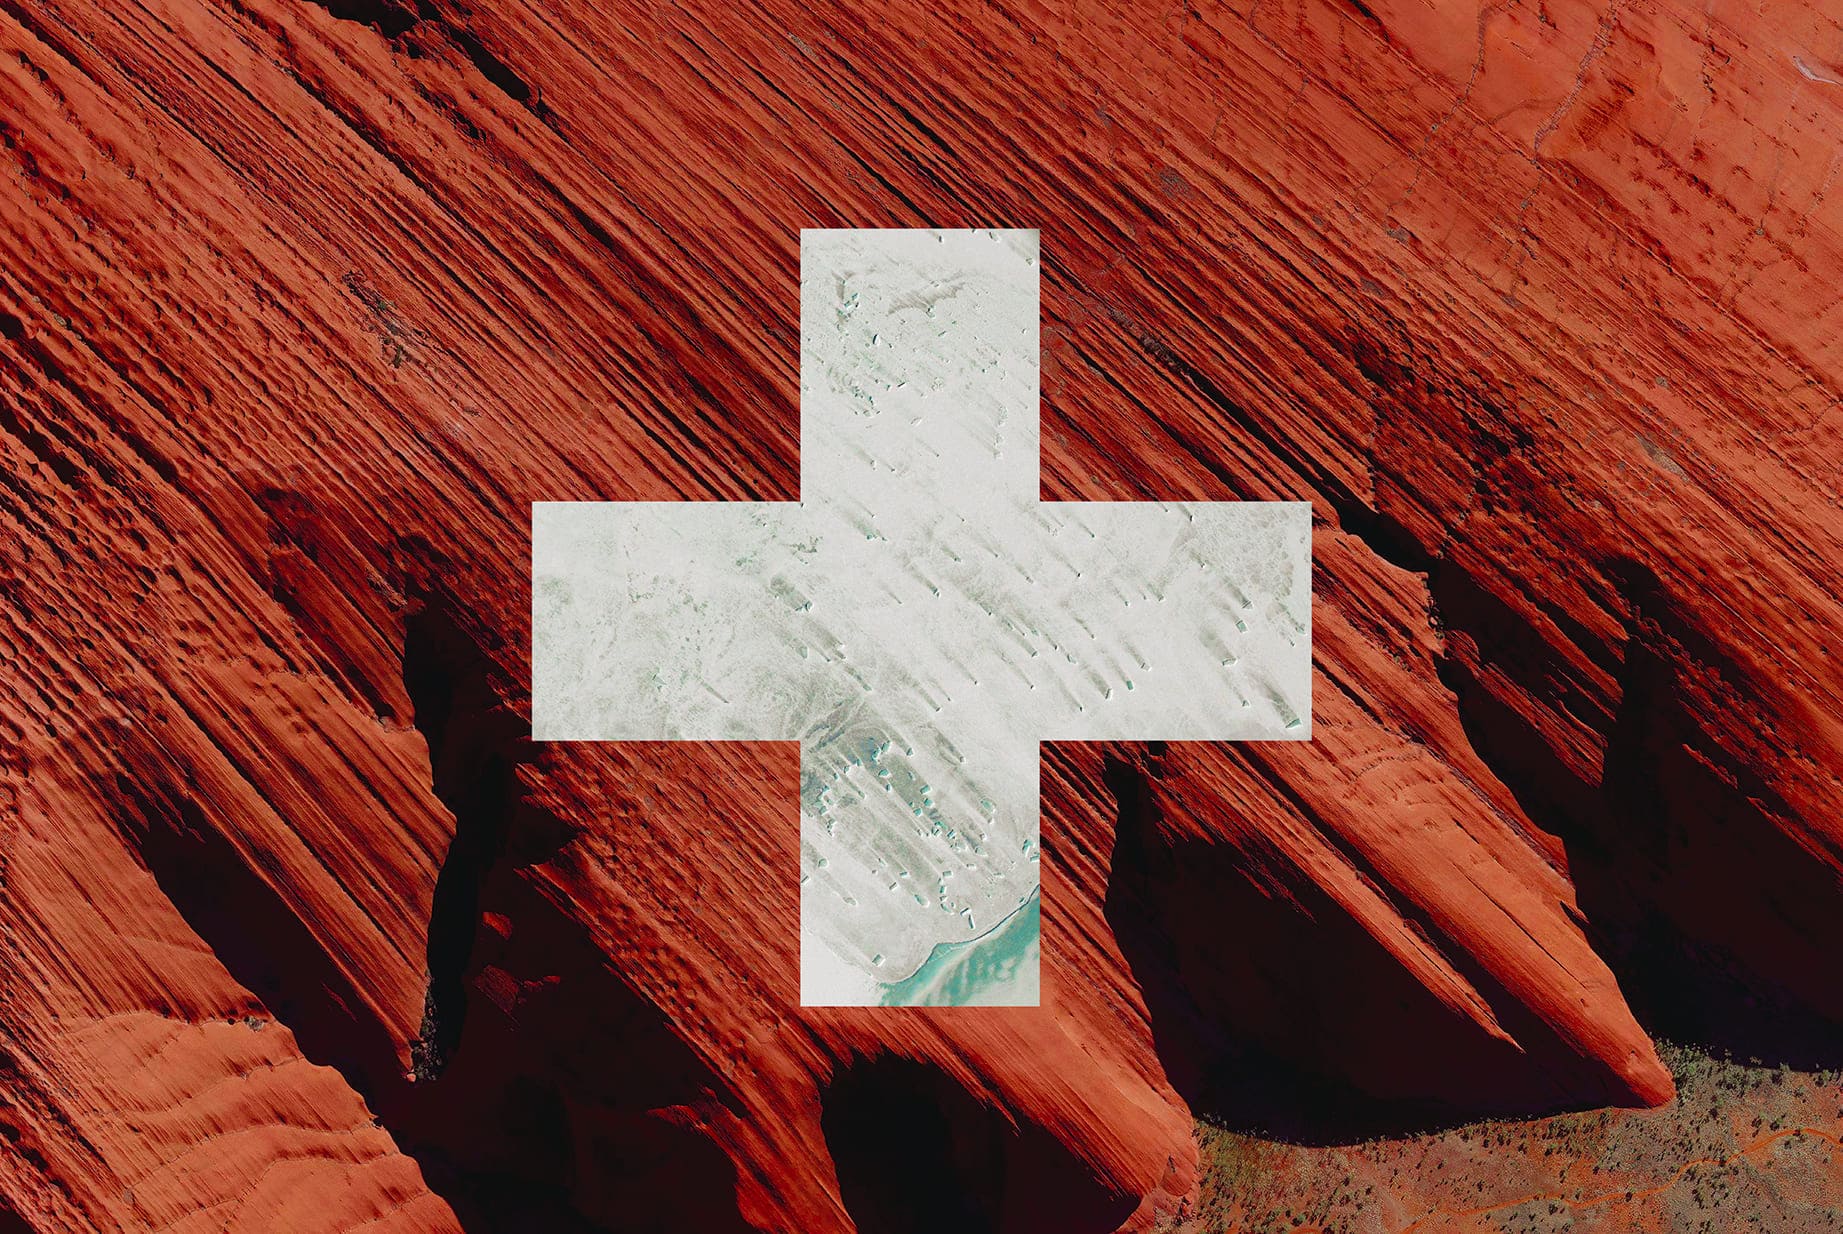 SWISS EARTH FLAG, 2016, DIGITAL COLLAGE OF SATELLITE PHOTOGRAPHY FROM AUSTRALIA, ANTARCTICA, diasec print CM 67×100, limited edition 9